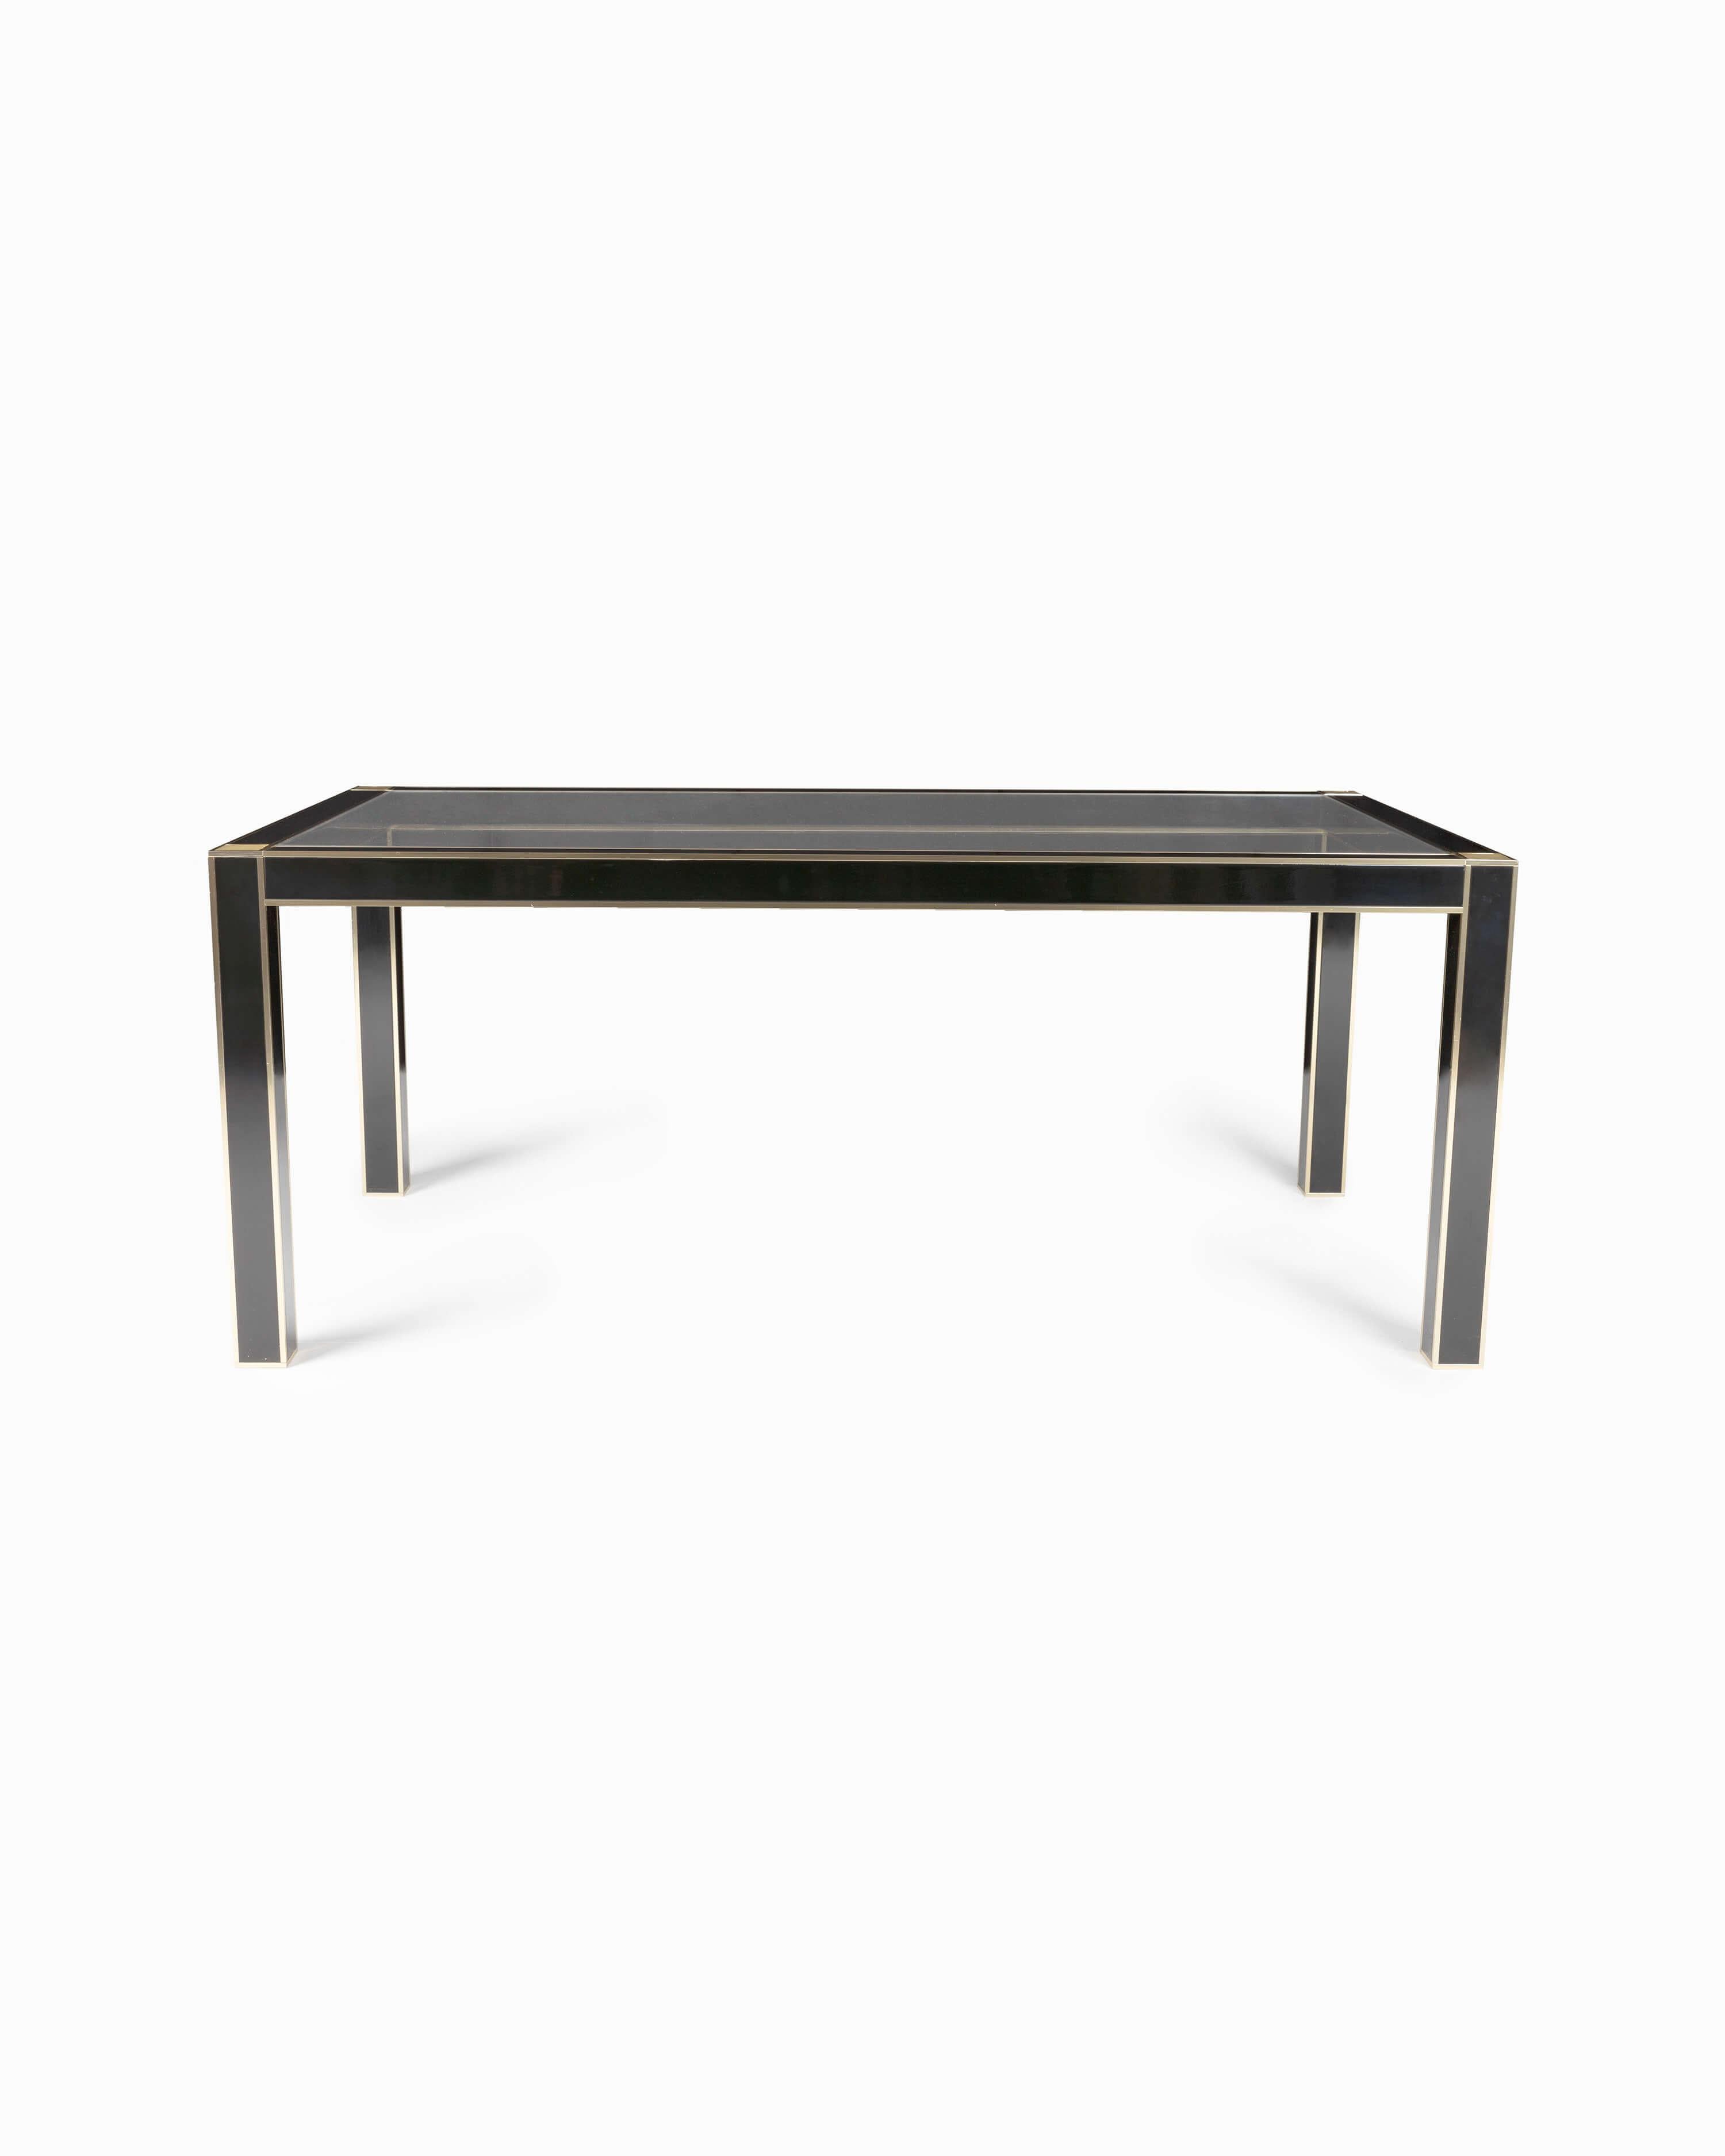 Art Deco Dining Table for Roche Bobois in Black Lacquer by Pierre Cardin, circa 1980 For Sale